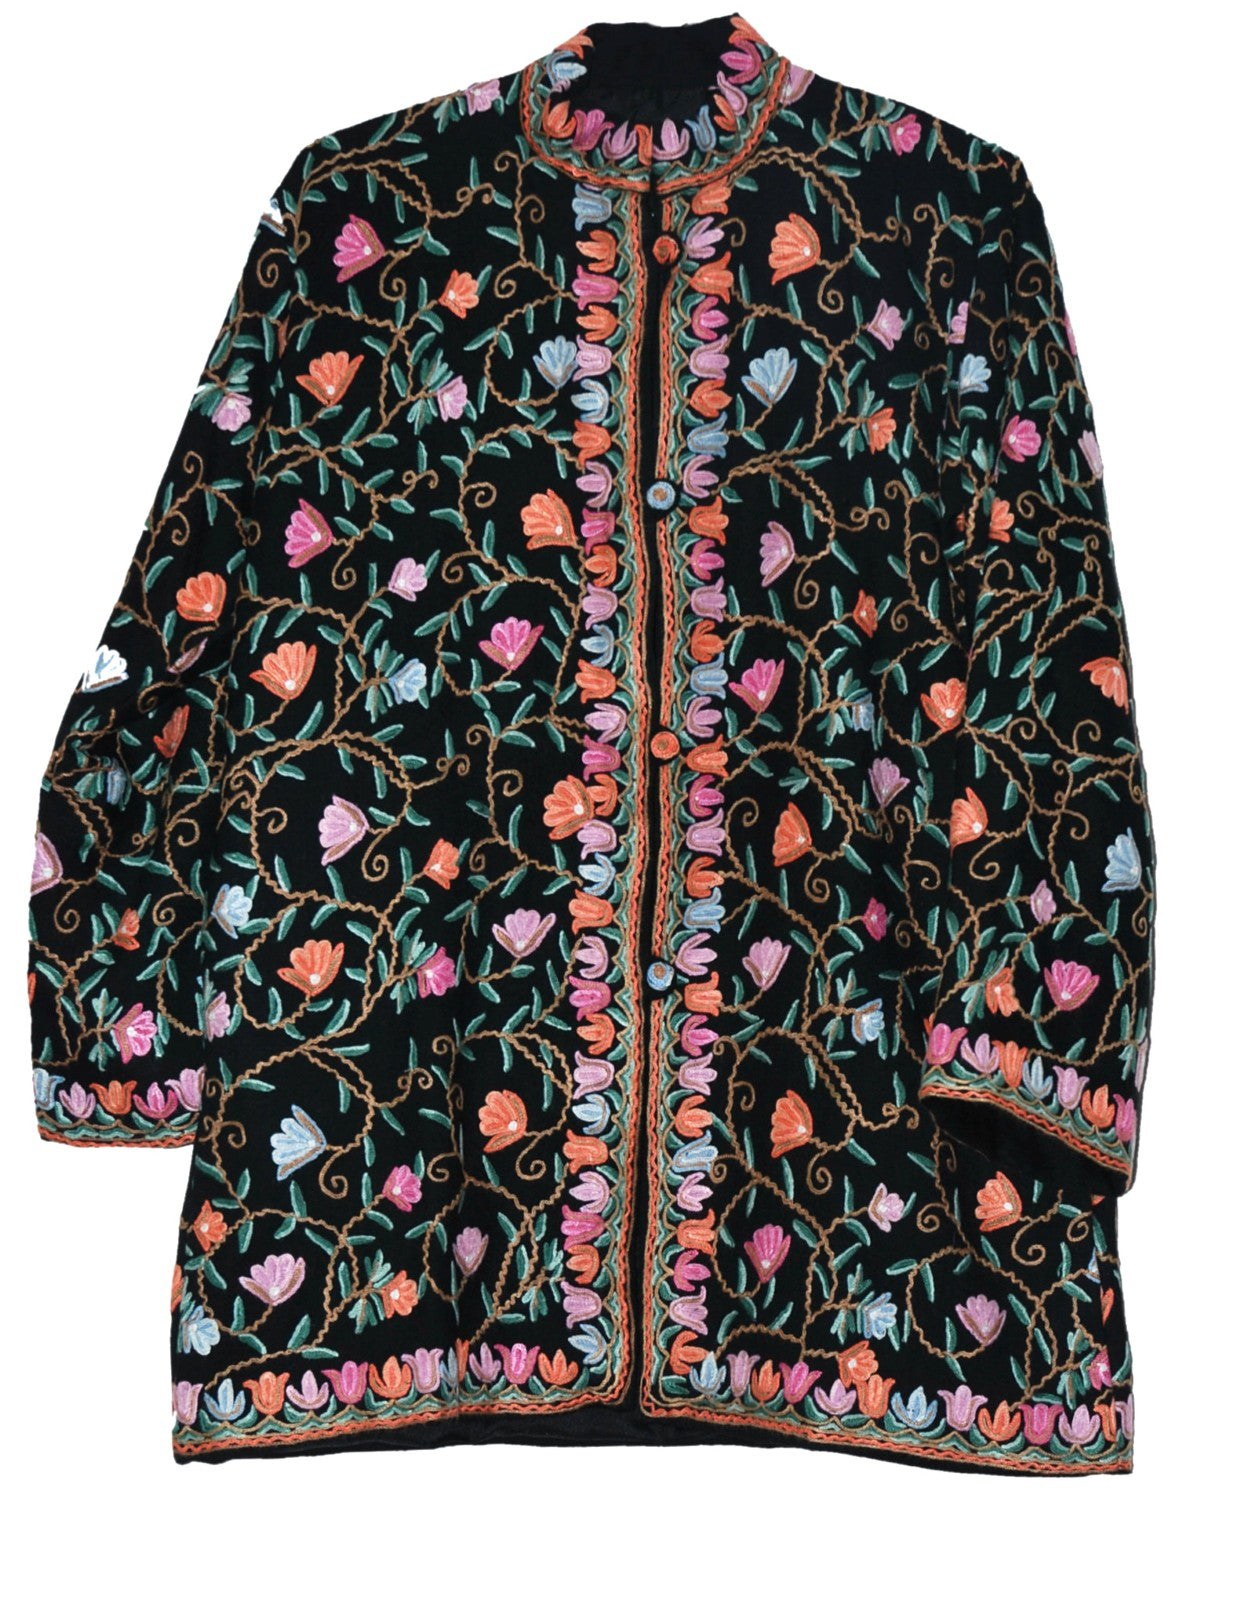 Embroidered Woolen Jacket Black, Multicolor Embroidery #AO-025